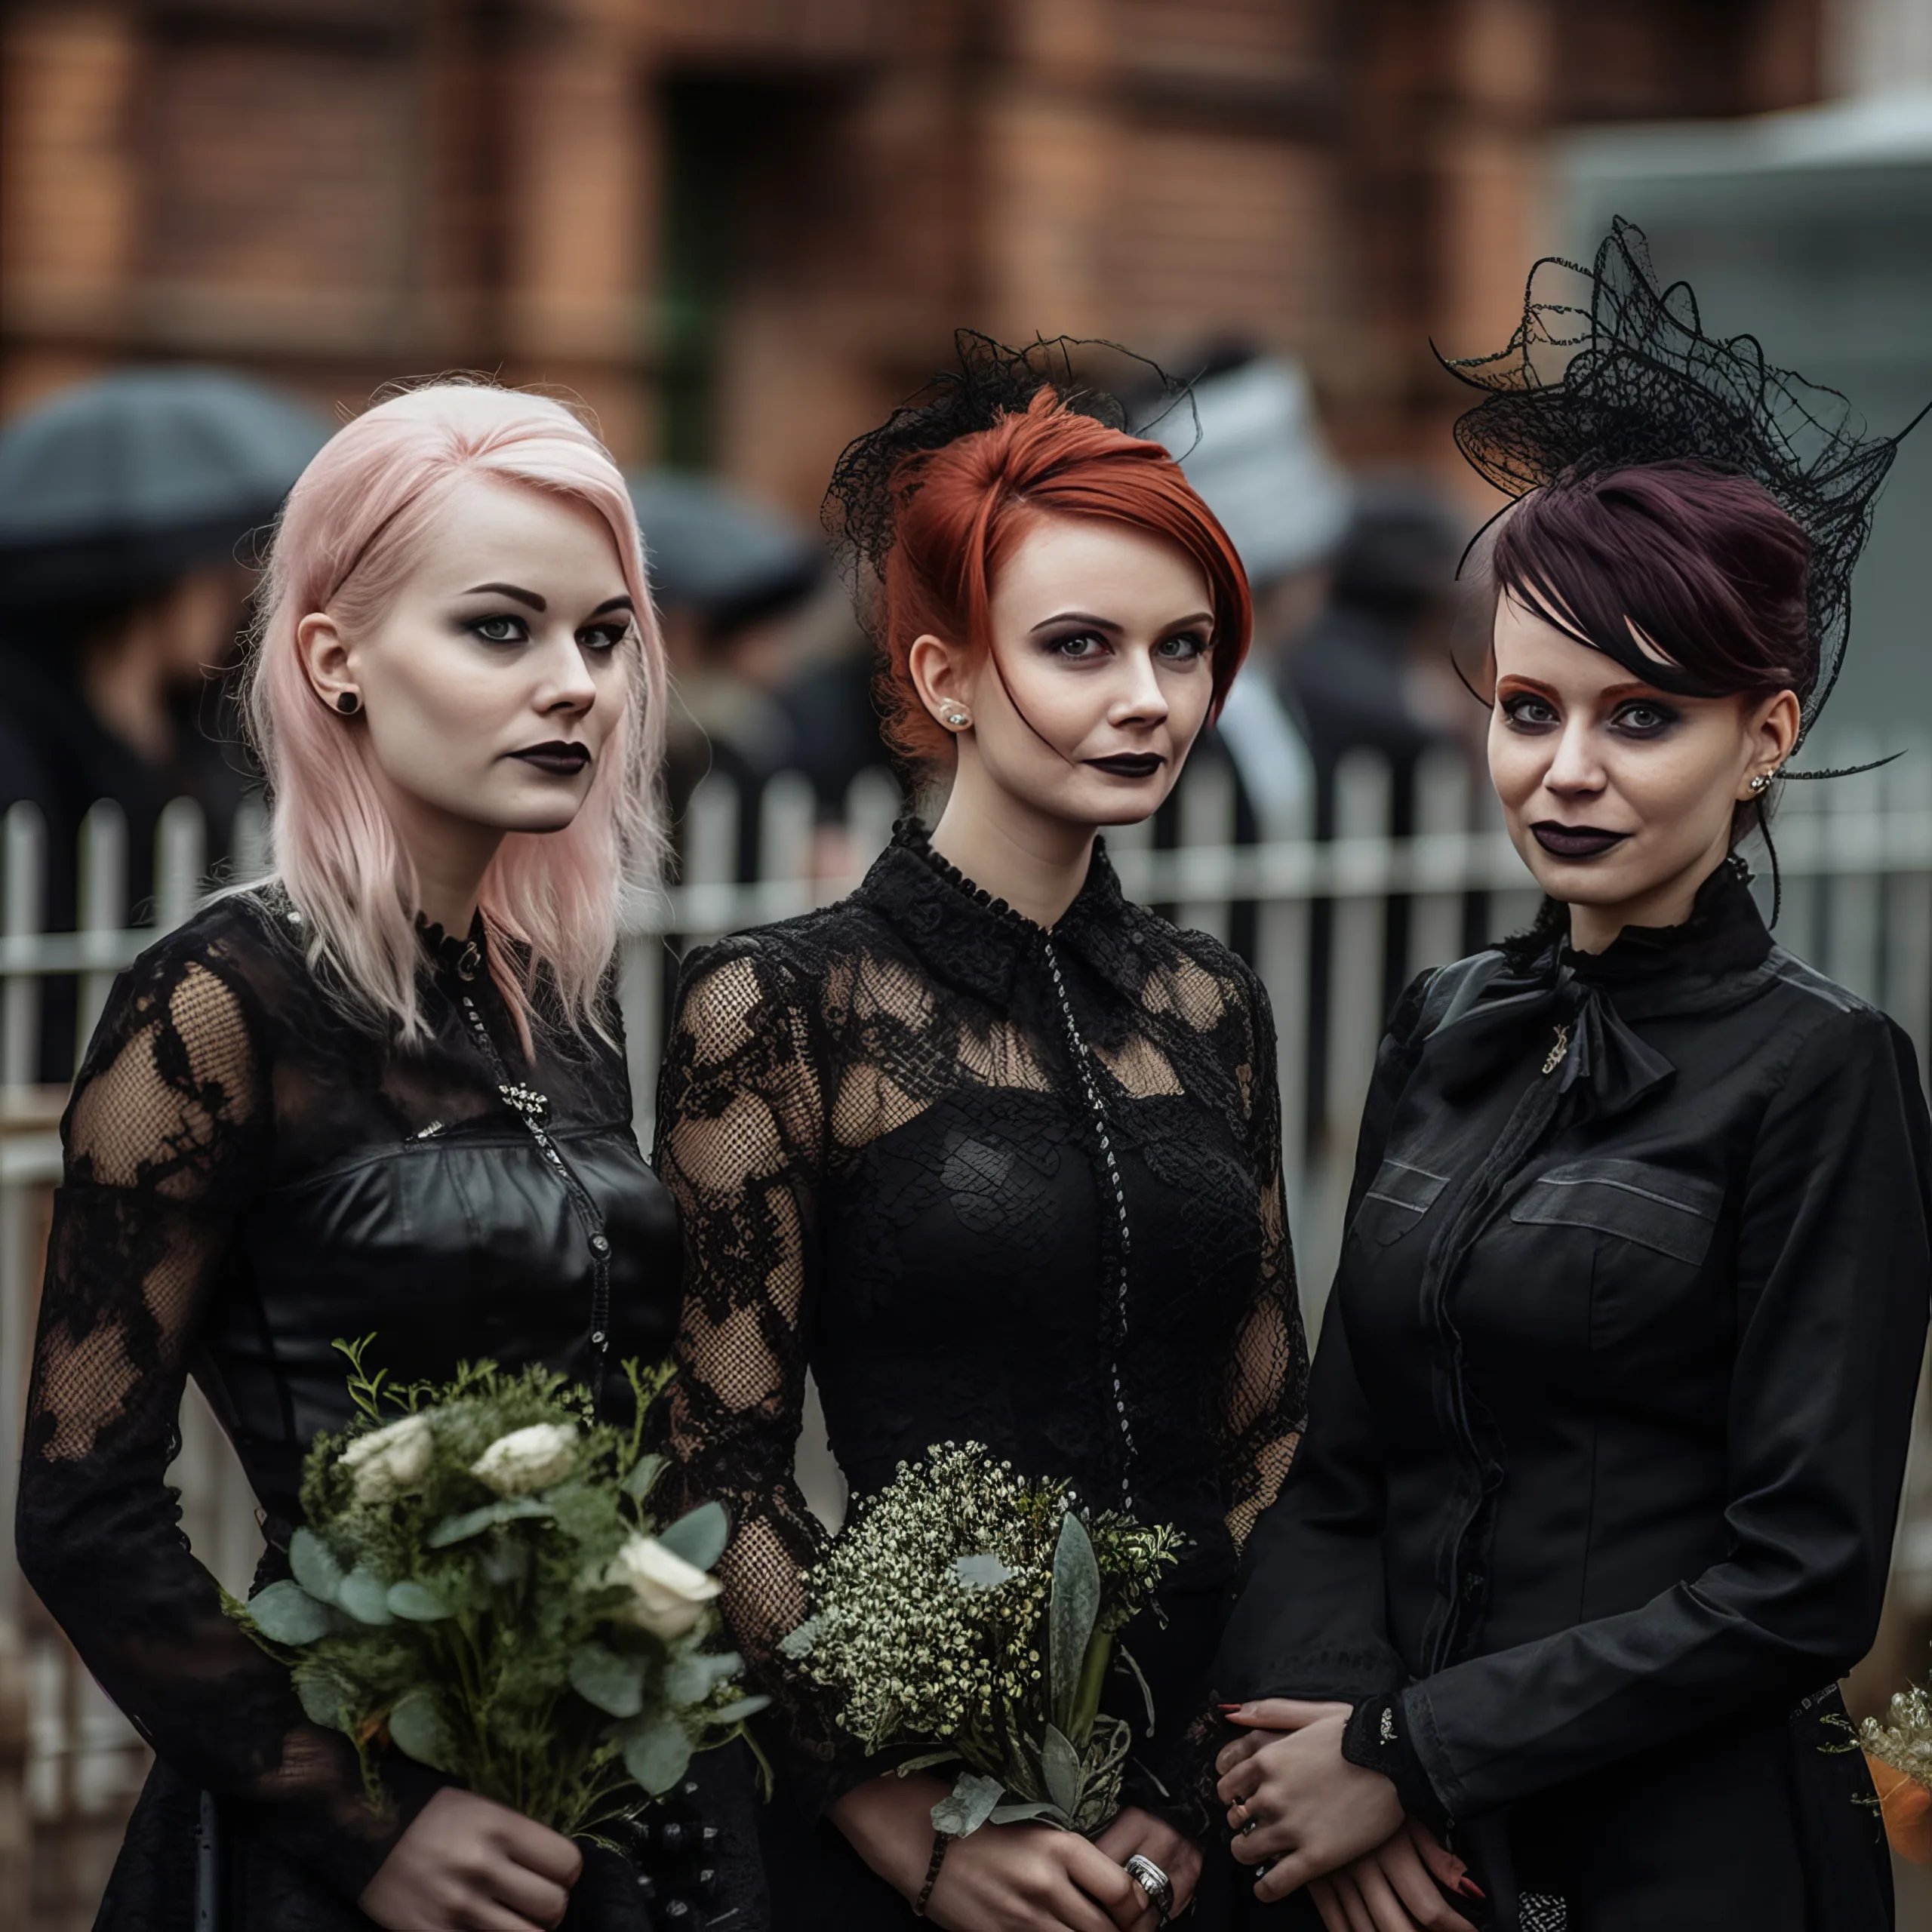 Goth Wedding Photographer: a group of three women standing next to each other.